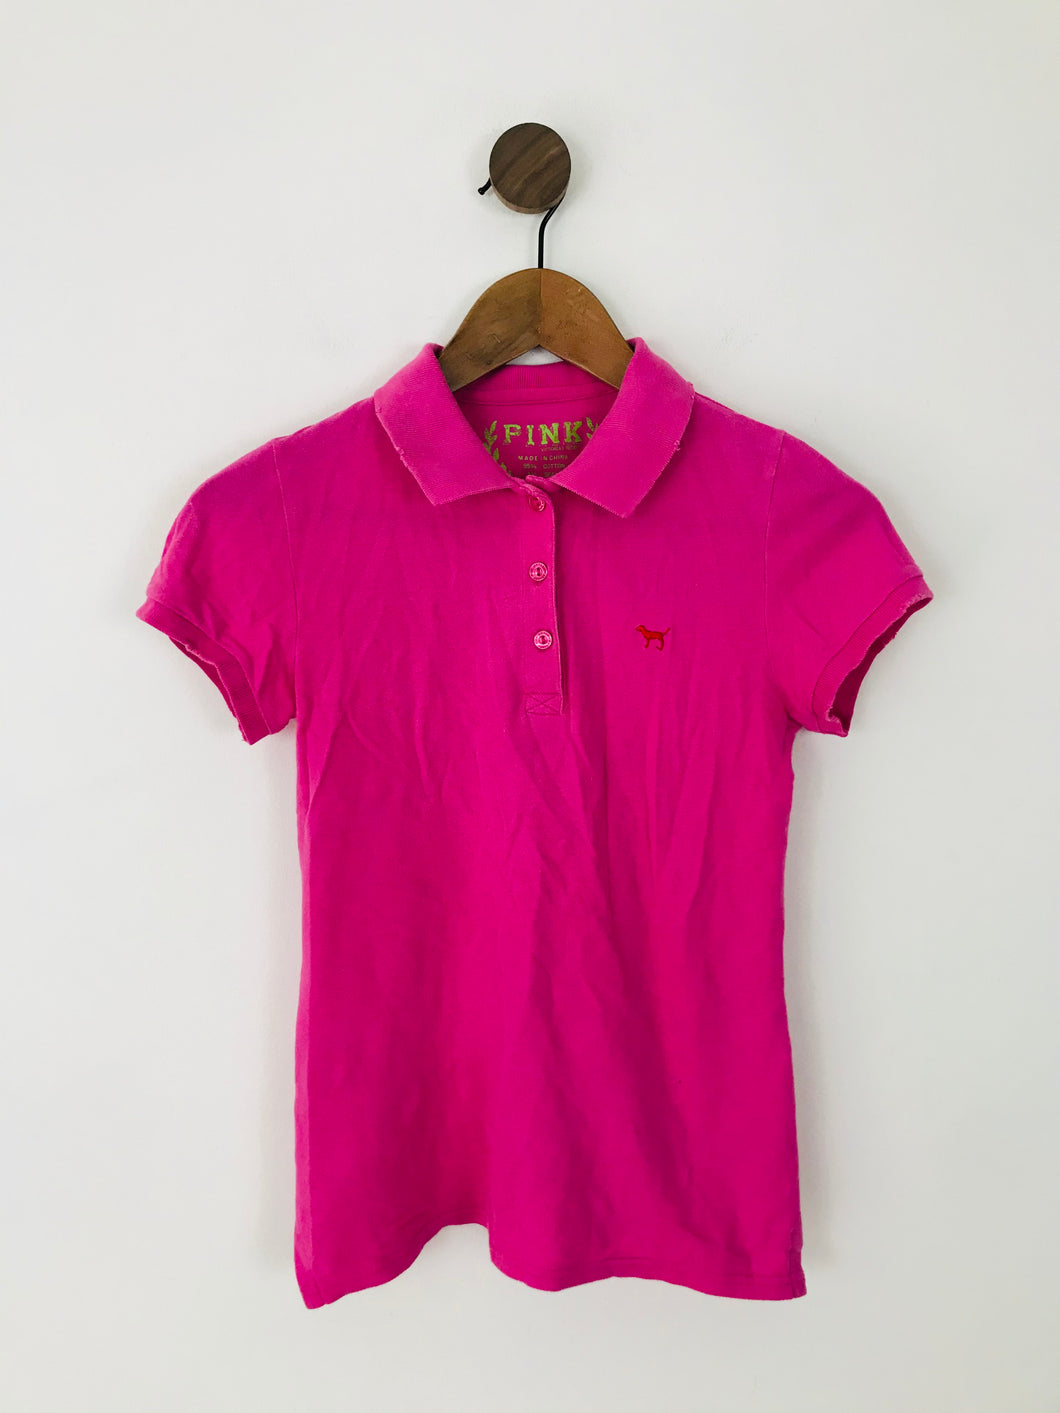 Victoria’s Secret PINK Women’s Distressed Polo Shirt Top | XS | Pink